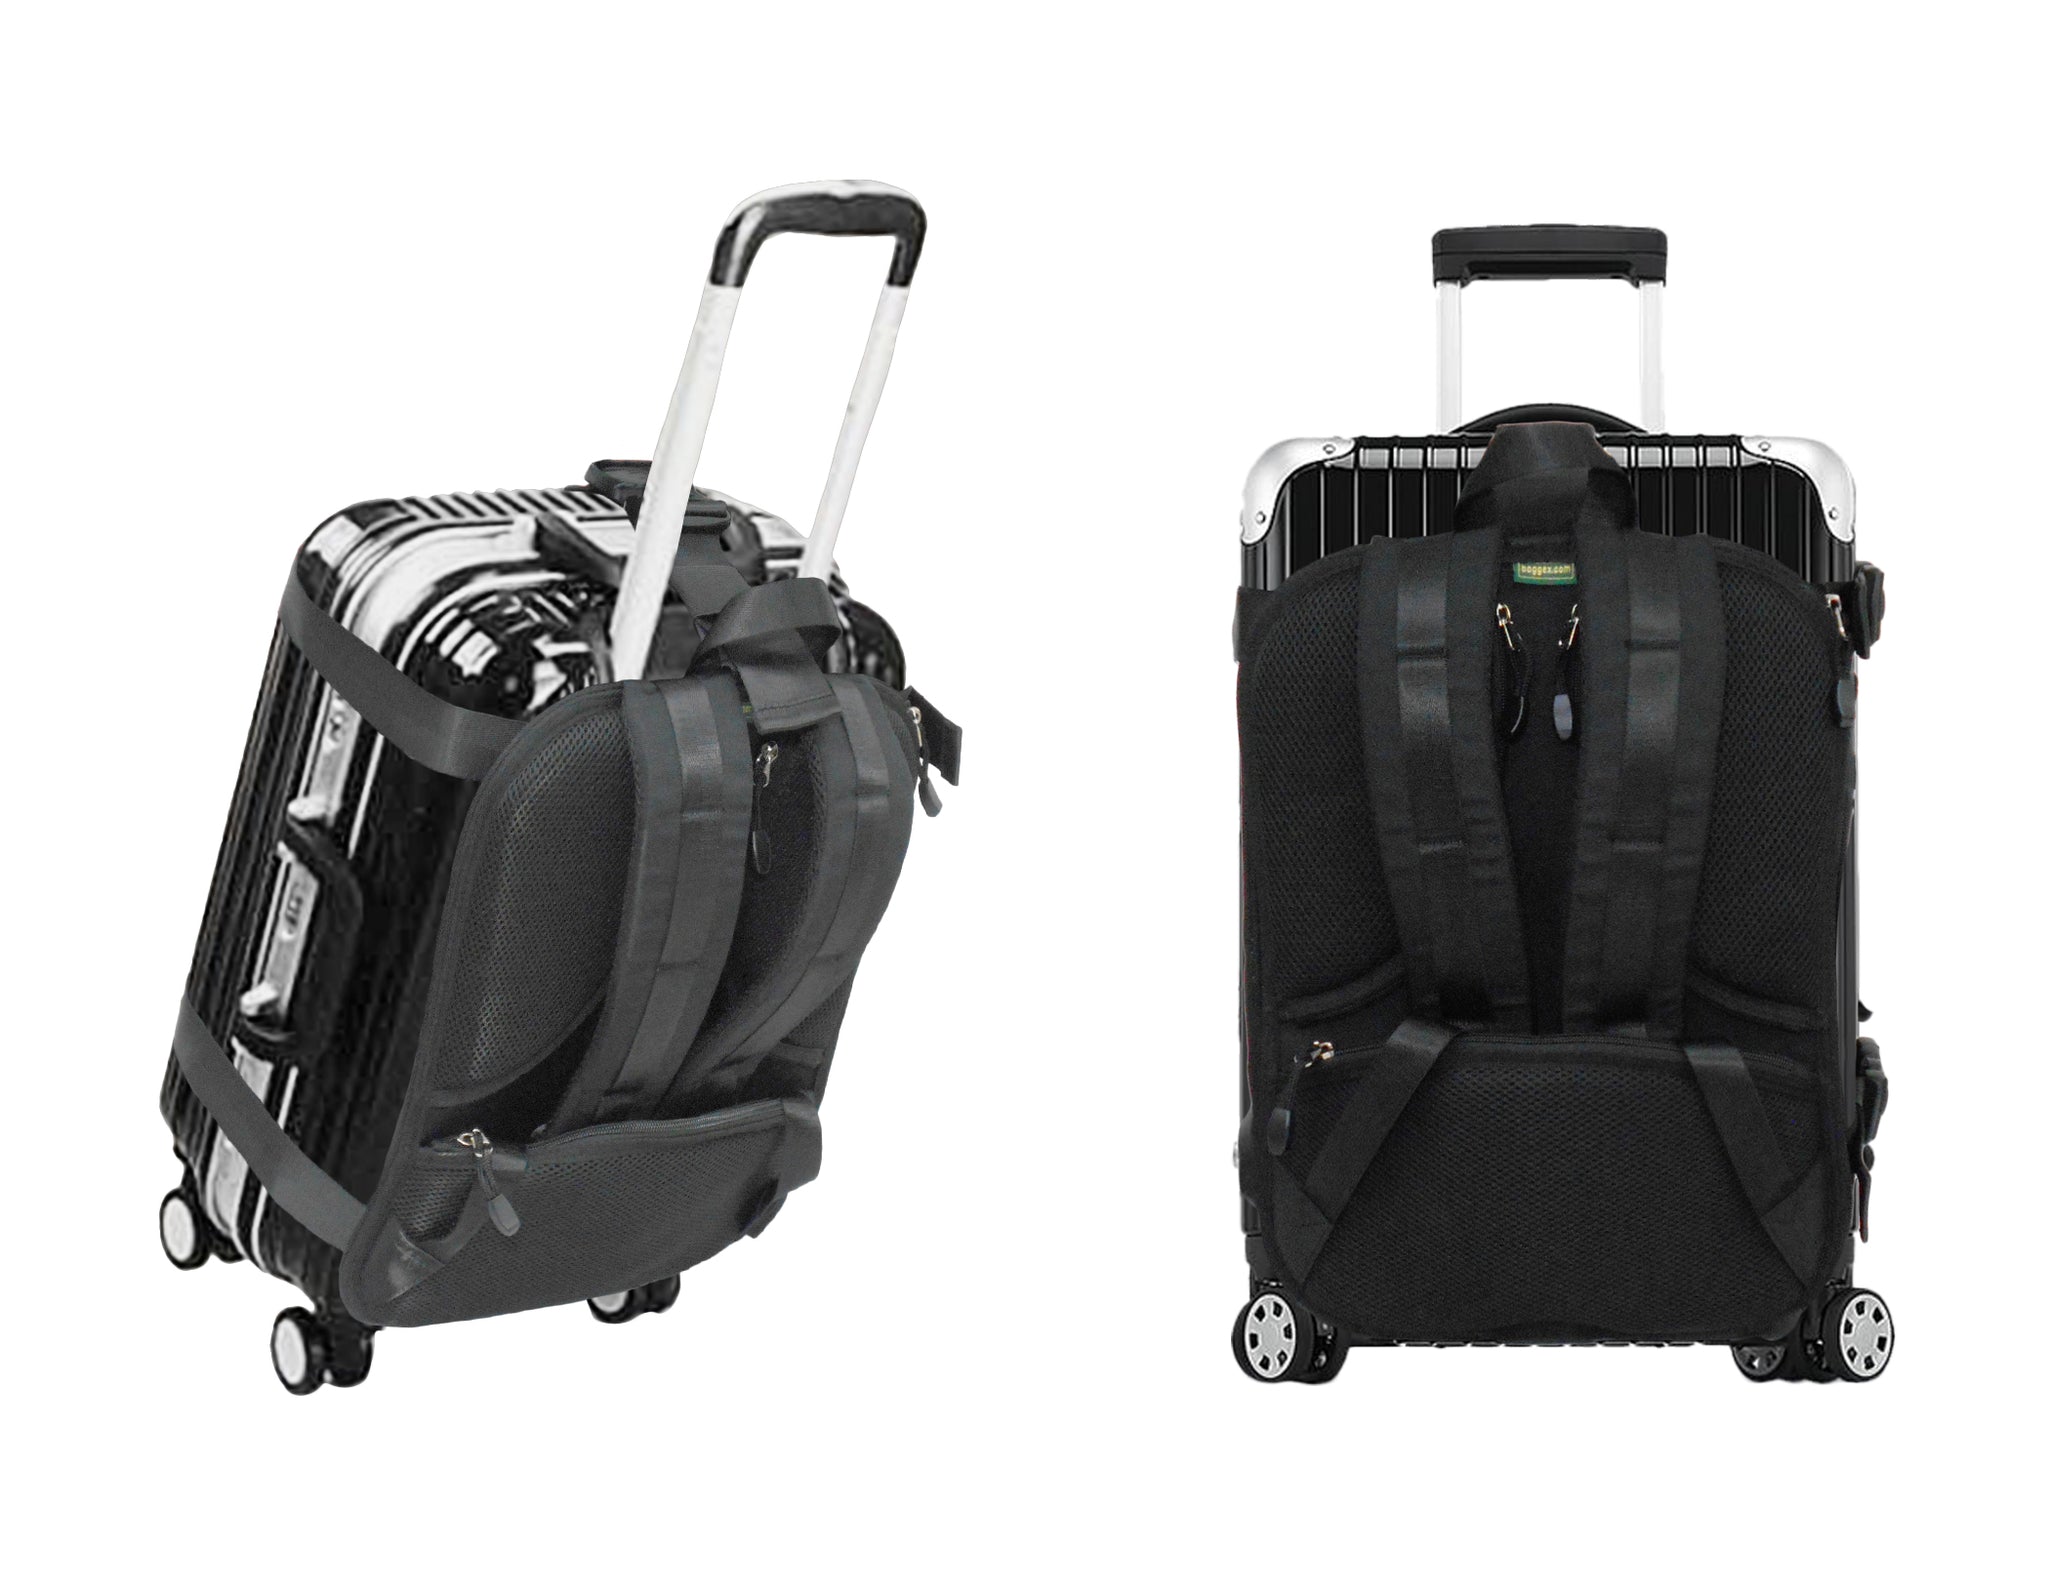 Hardcase/Carry On Trolley Luggage Backpack Conversion System